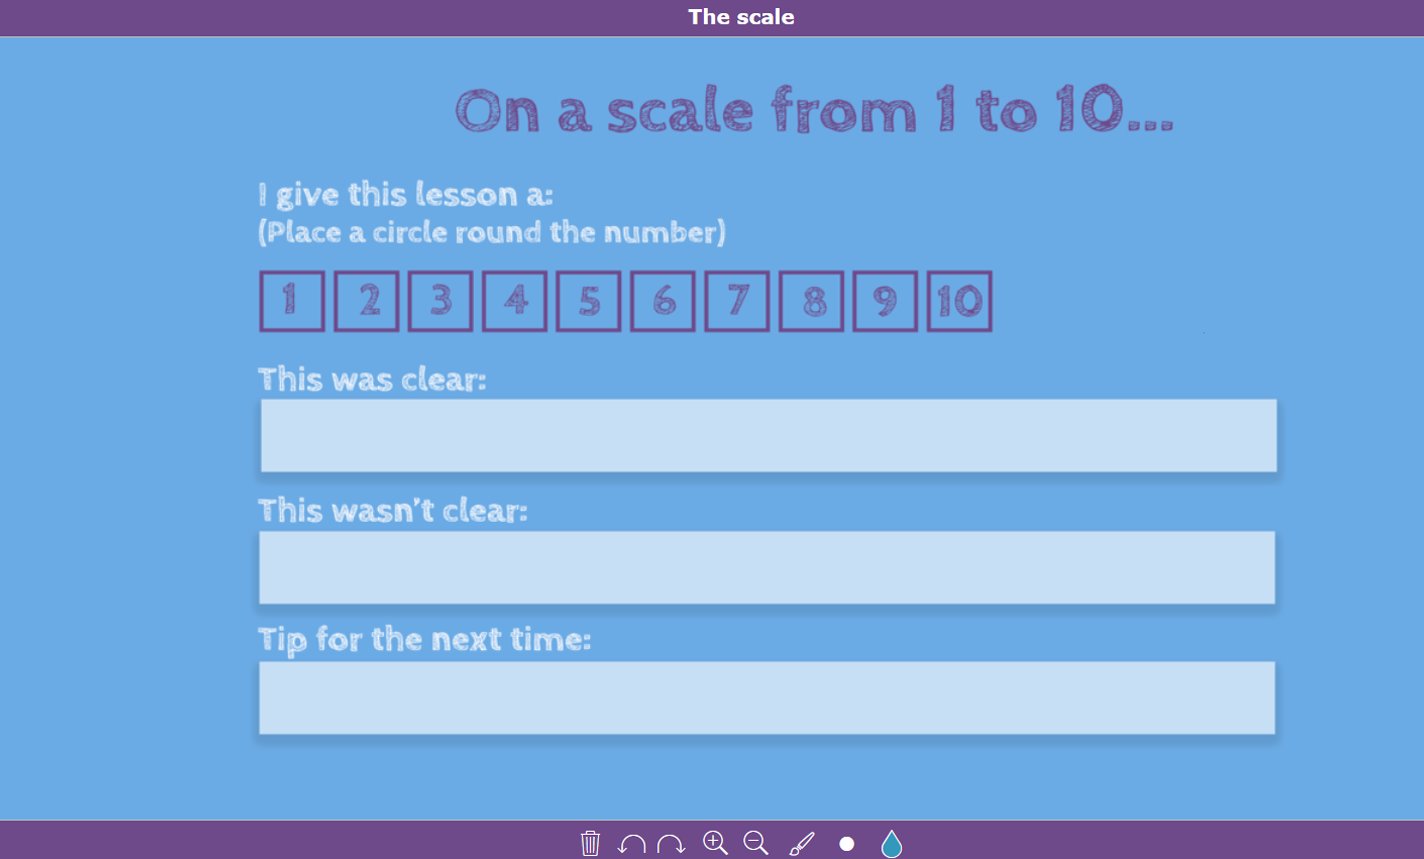 digital exit ticket - The scale